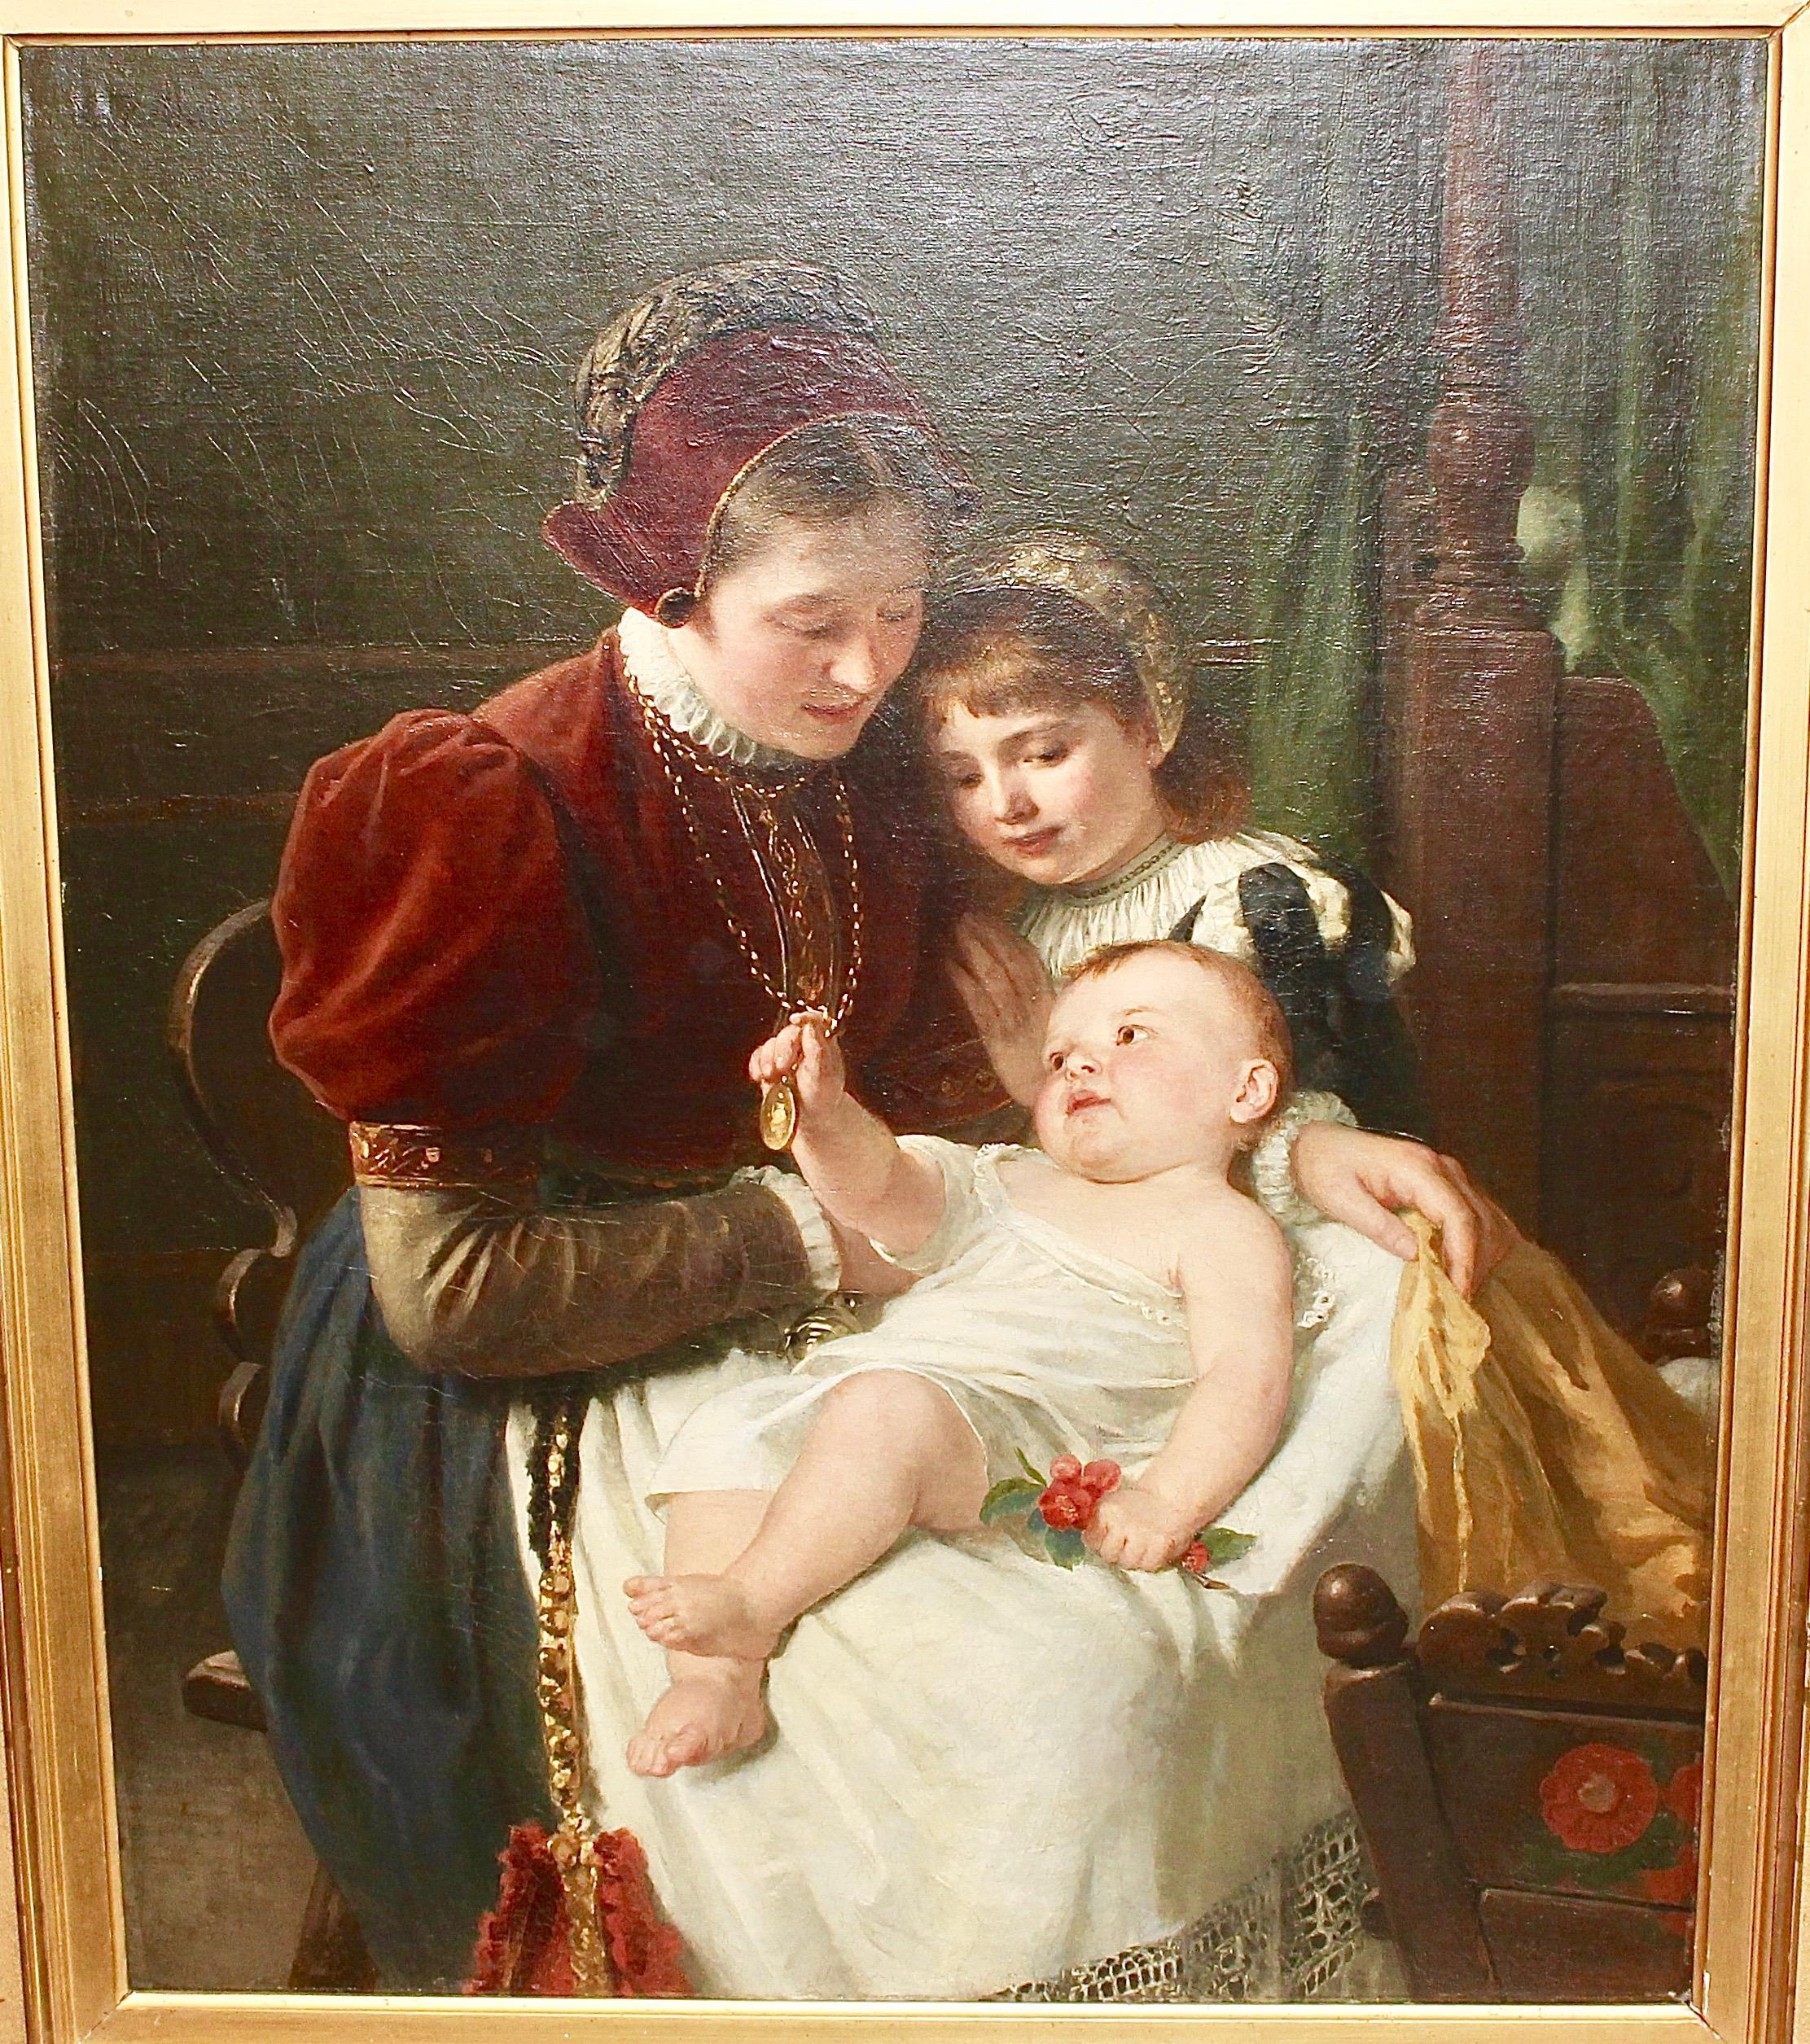 Otto Rethel, Antique Oil Painting, Mother with Children, 19th Century.

Adorable, antique oil painting by the famous German painter Otto Rethel. Oil on canvas. Signed on the canvas and frame.

Dimensions with frame: 103cm x 117.5cm

Due to age very